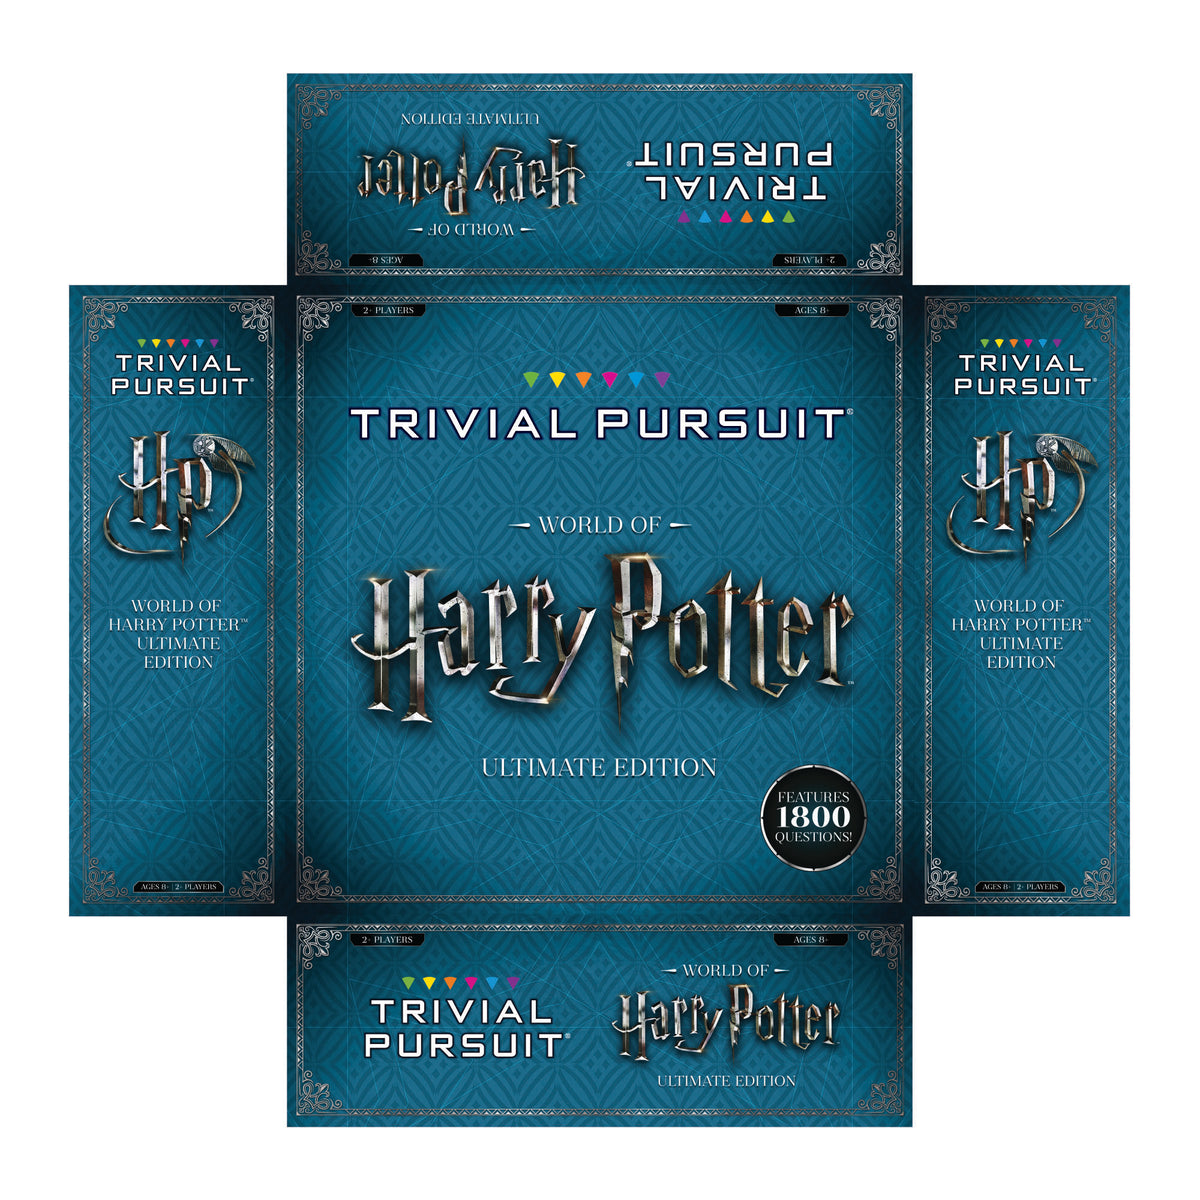 World of Harry Potter Trivial Pursuit by Hasbro 794628116303